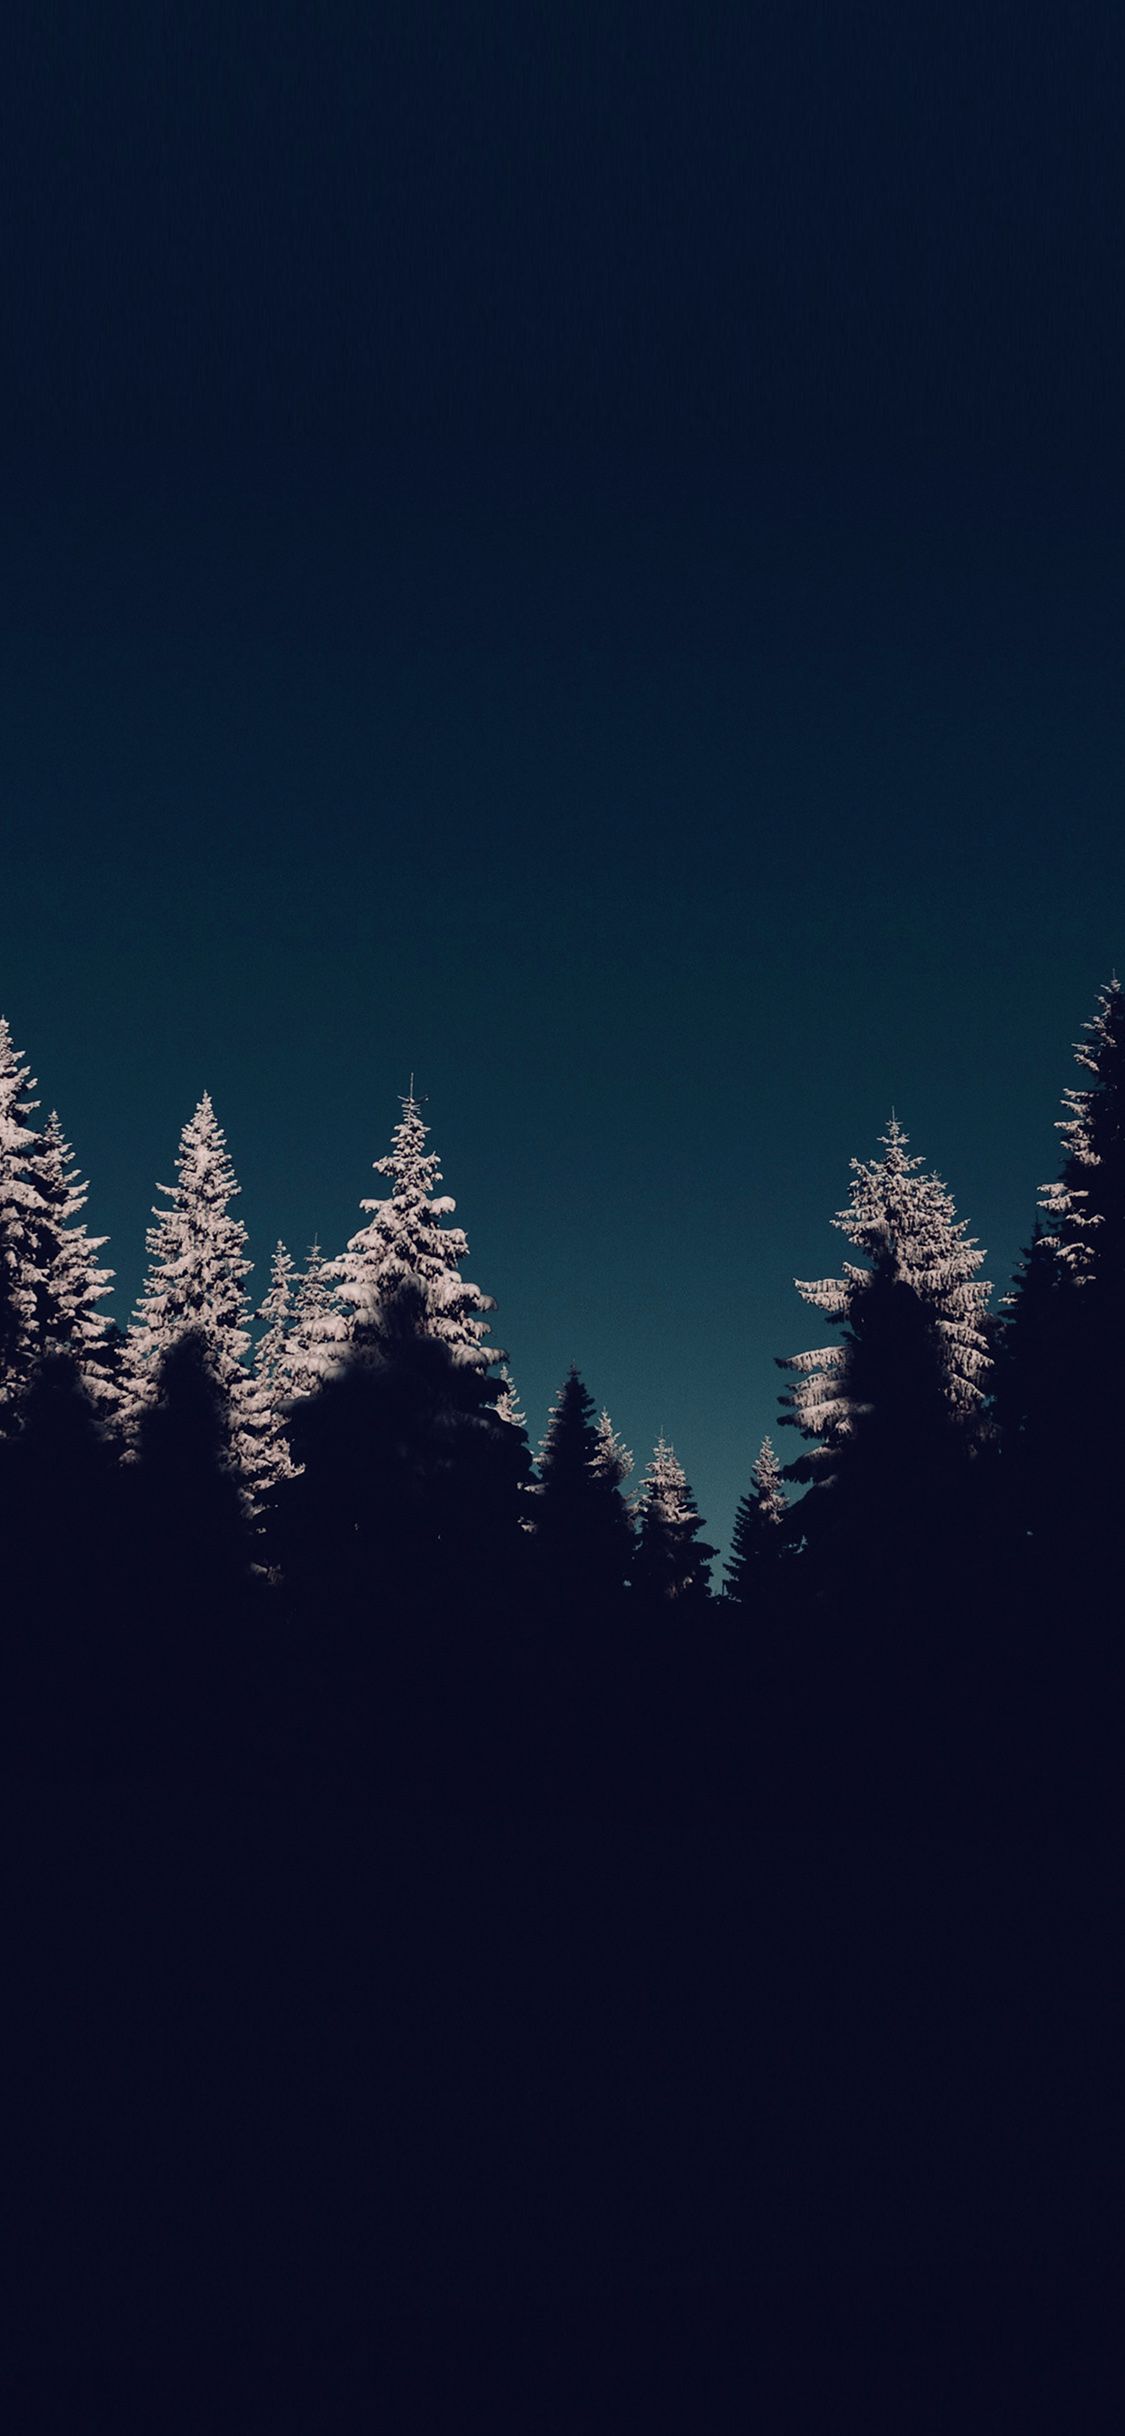 A blurry image of trees in the dark - Winter, mountain, snow